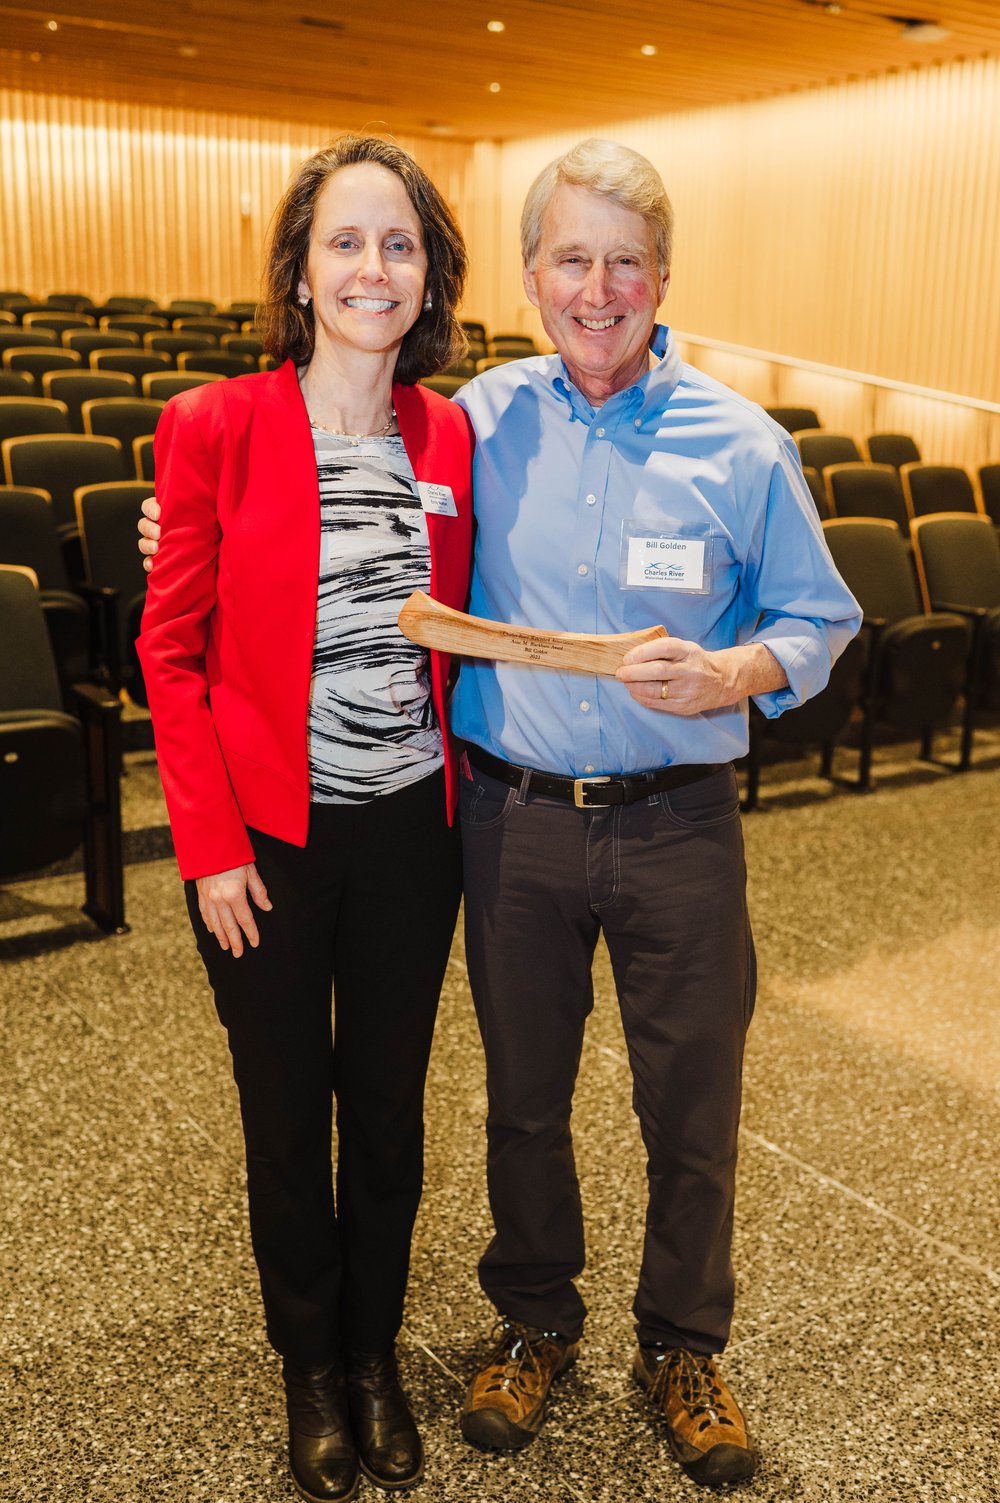 Executive Director Emily Norton with Annual Meeting awardee Bill Golden